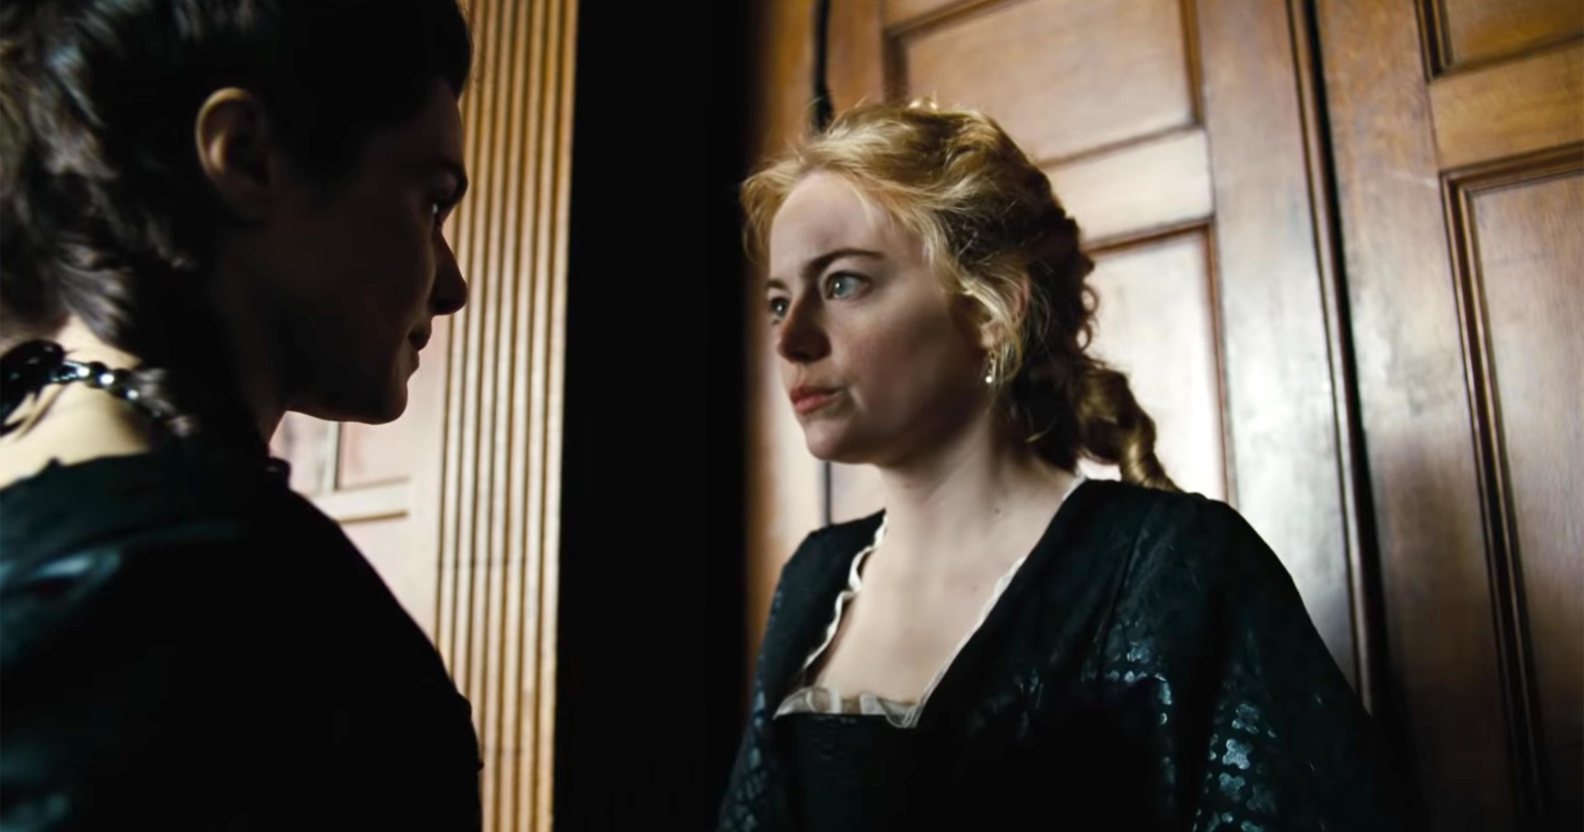 Celebrity Porn Emma Stone - Emma Stone insisted on being naked in lesbian film The Favourite | PinkNews